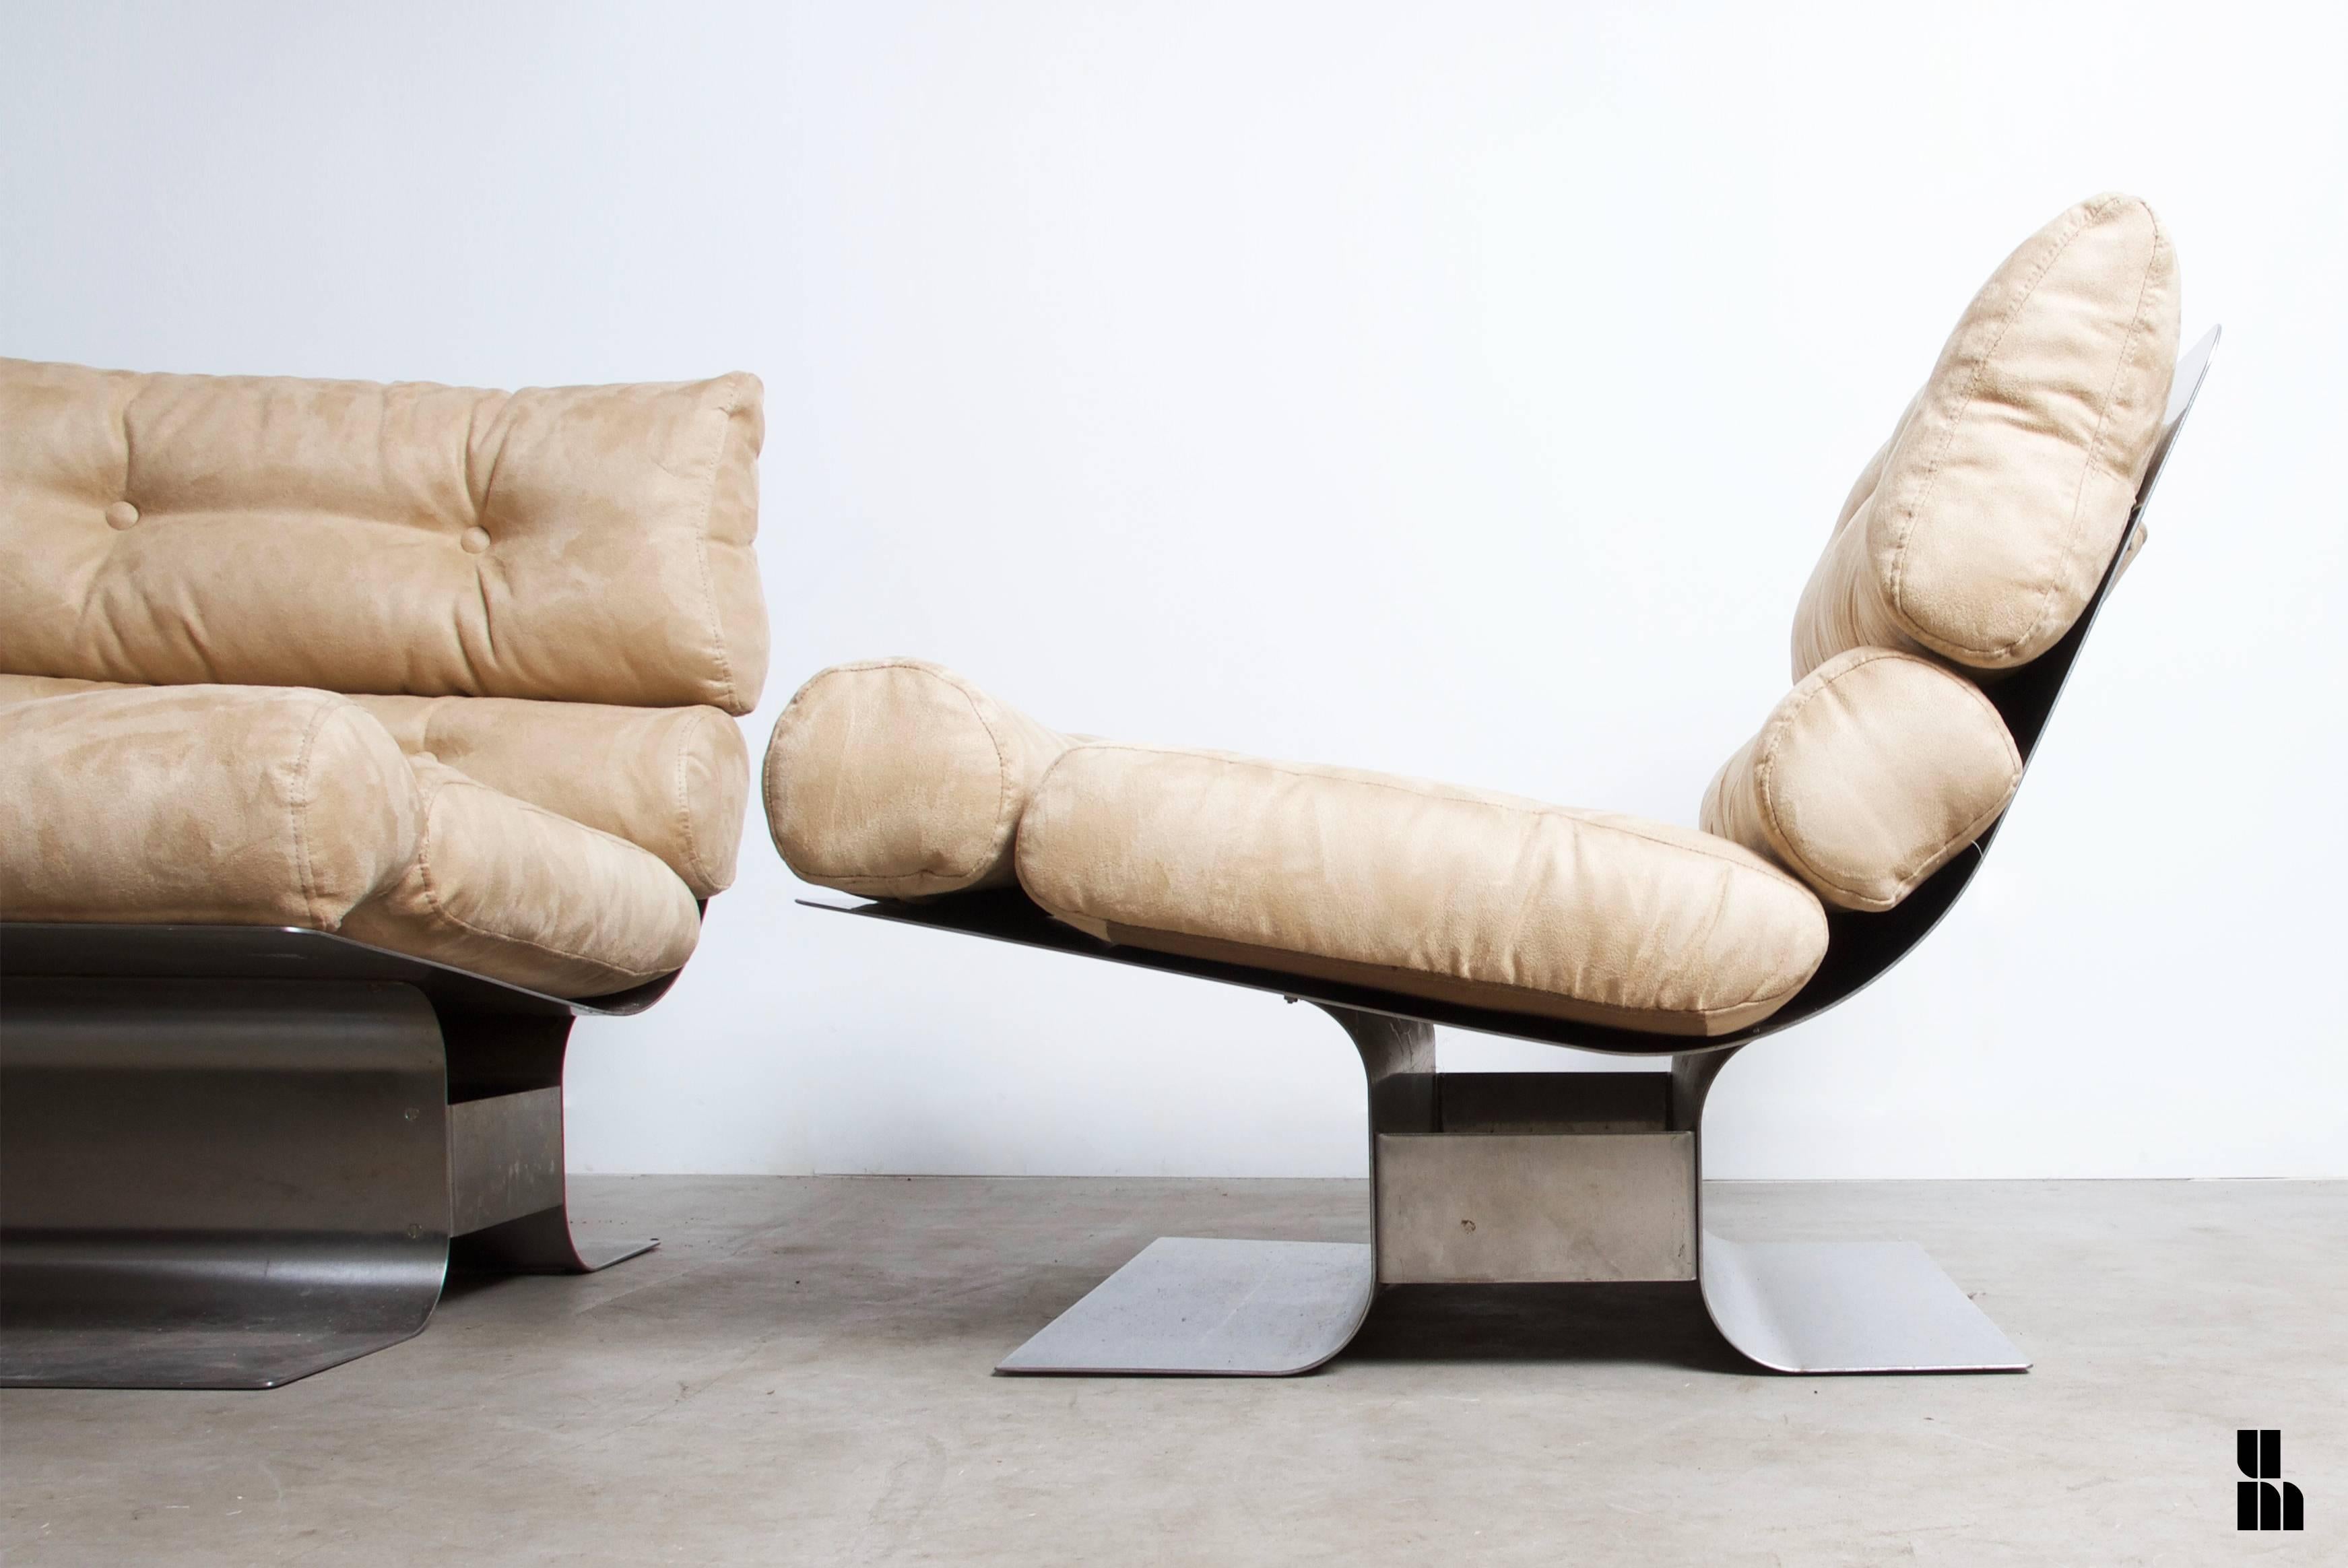 Post-Modern 1972, Francois Monnet, Kappa, Pair of Stainless Steel Lounge Chairs, Suede Seat